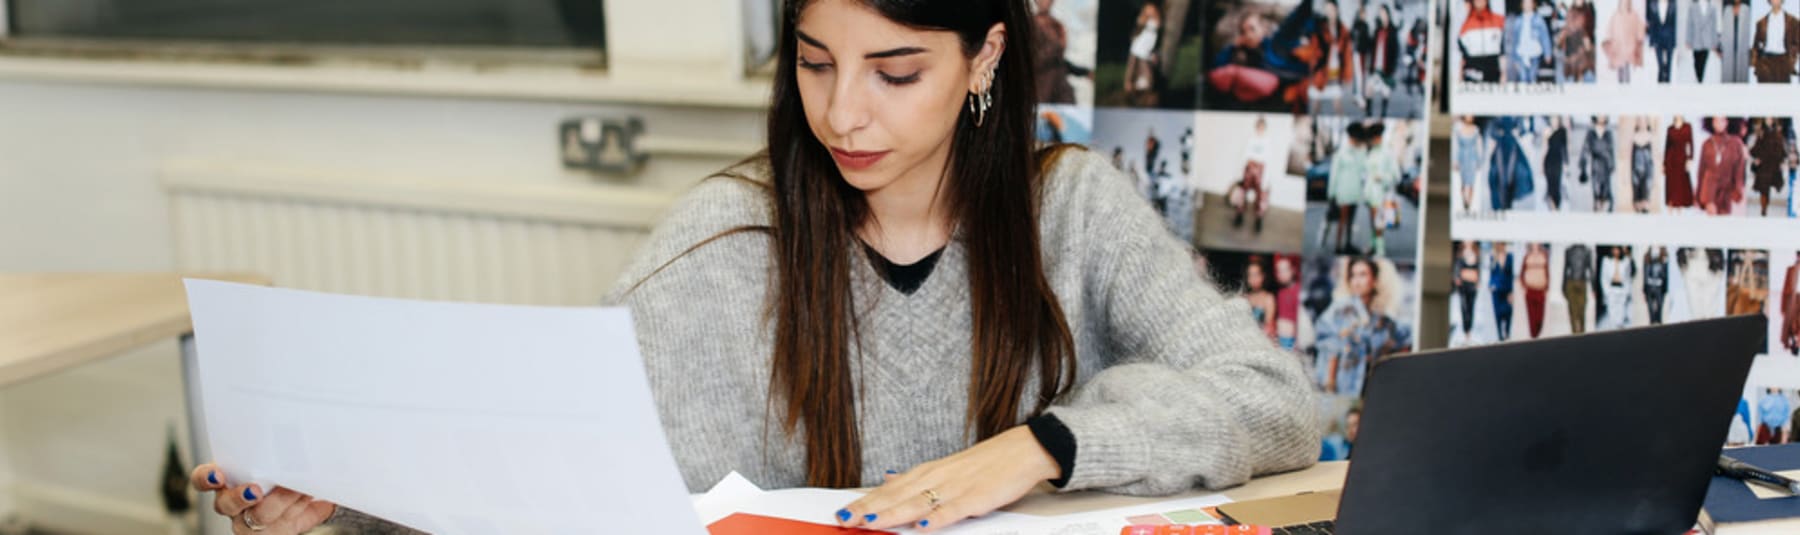 A student sitting at a desk with various pieces of work and a laptop, looking closely at an A3 sheet of paper